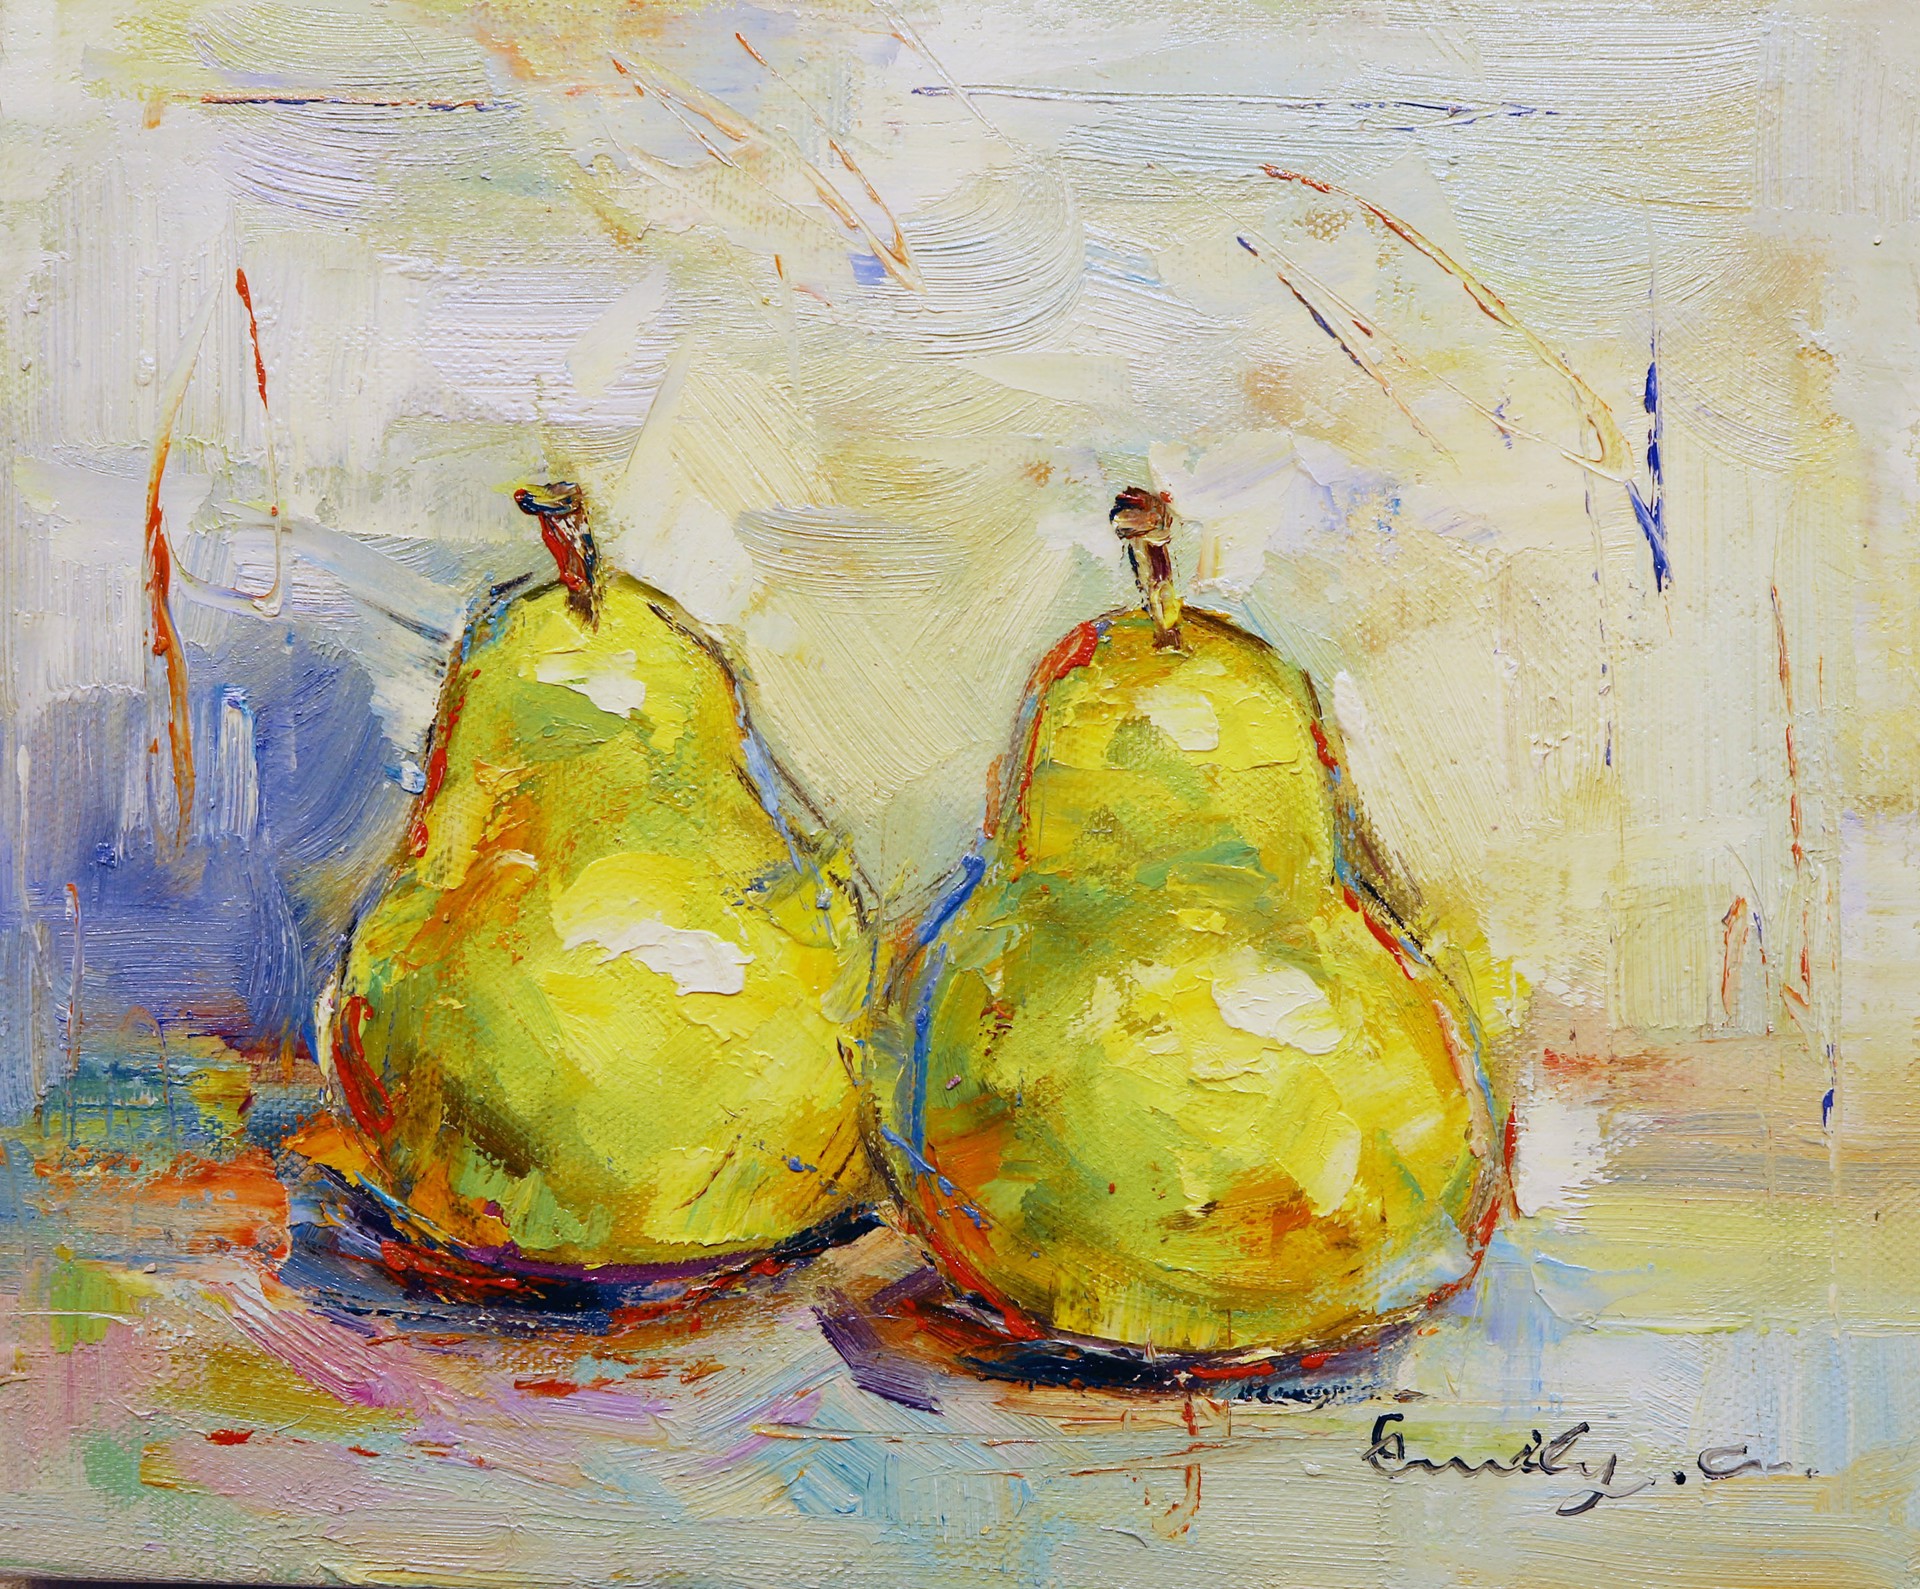 Emily C. - Untitled Pears by Miscellaneous